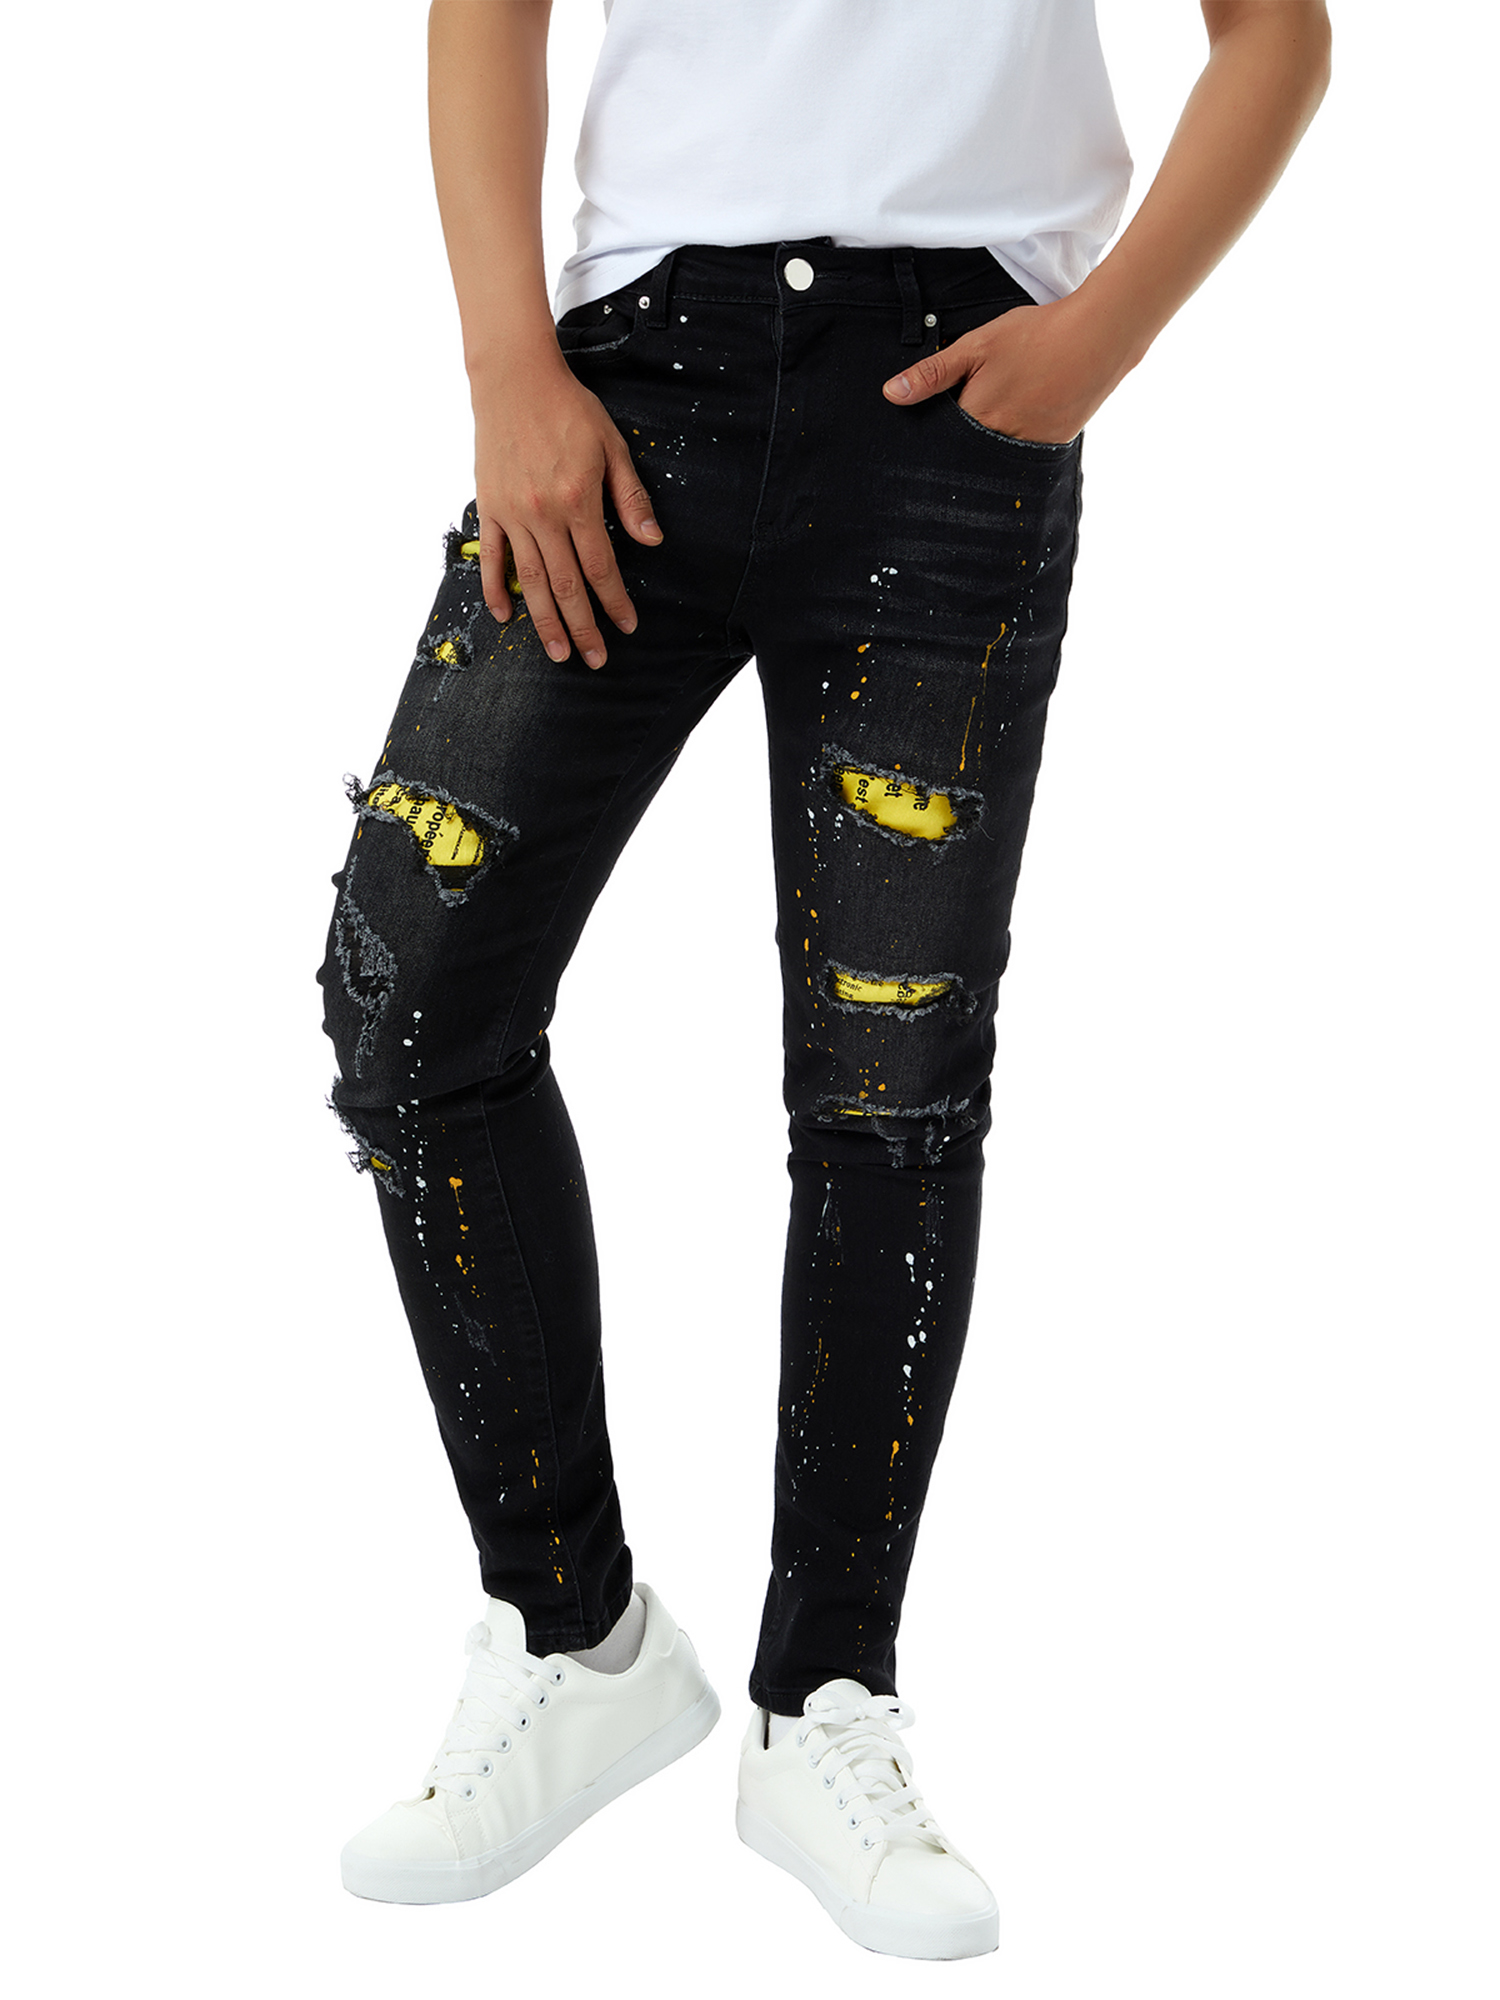 Men Casual Slim Fit Denim Jeans Skinny Distressed Jeans Trousers Motorcycle Rider Hole Pants Jeans - image 2 of 6